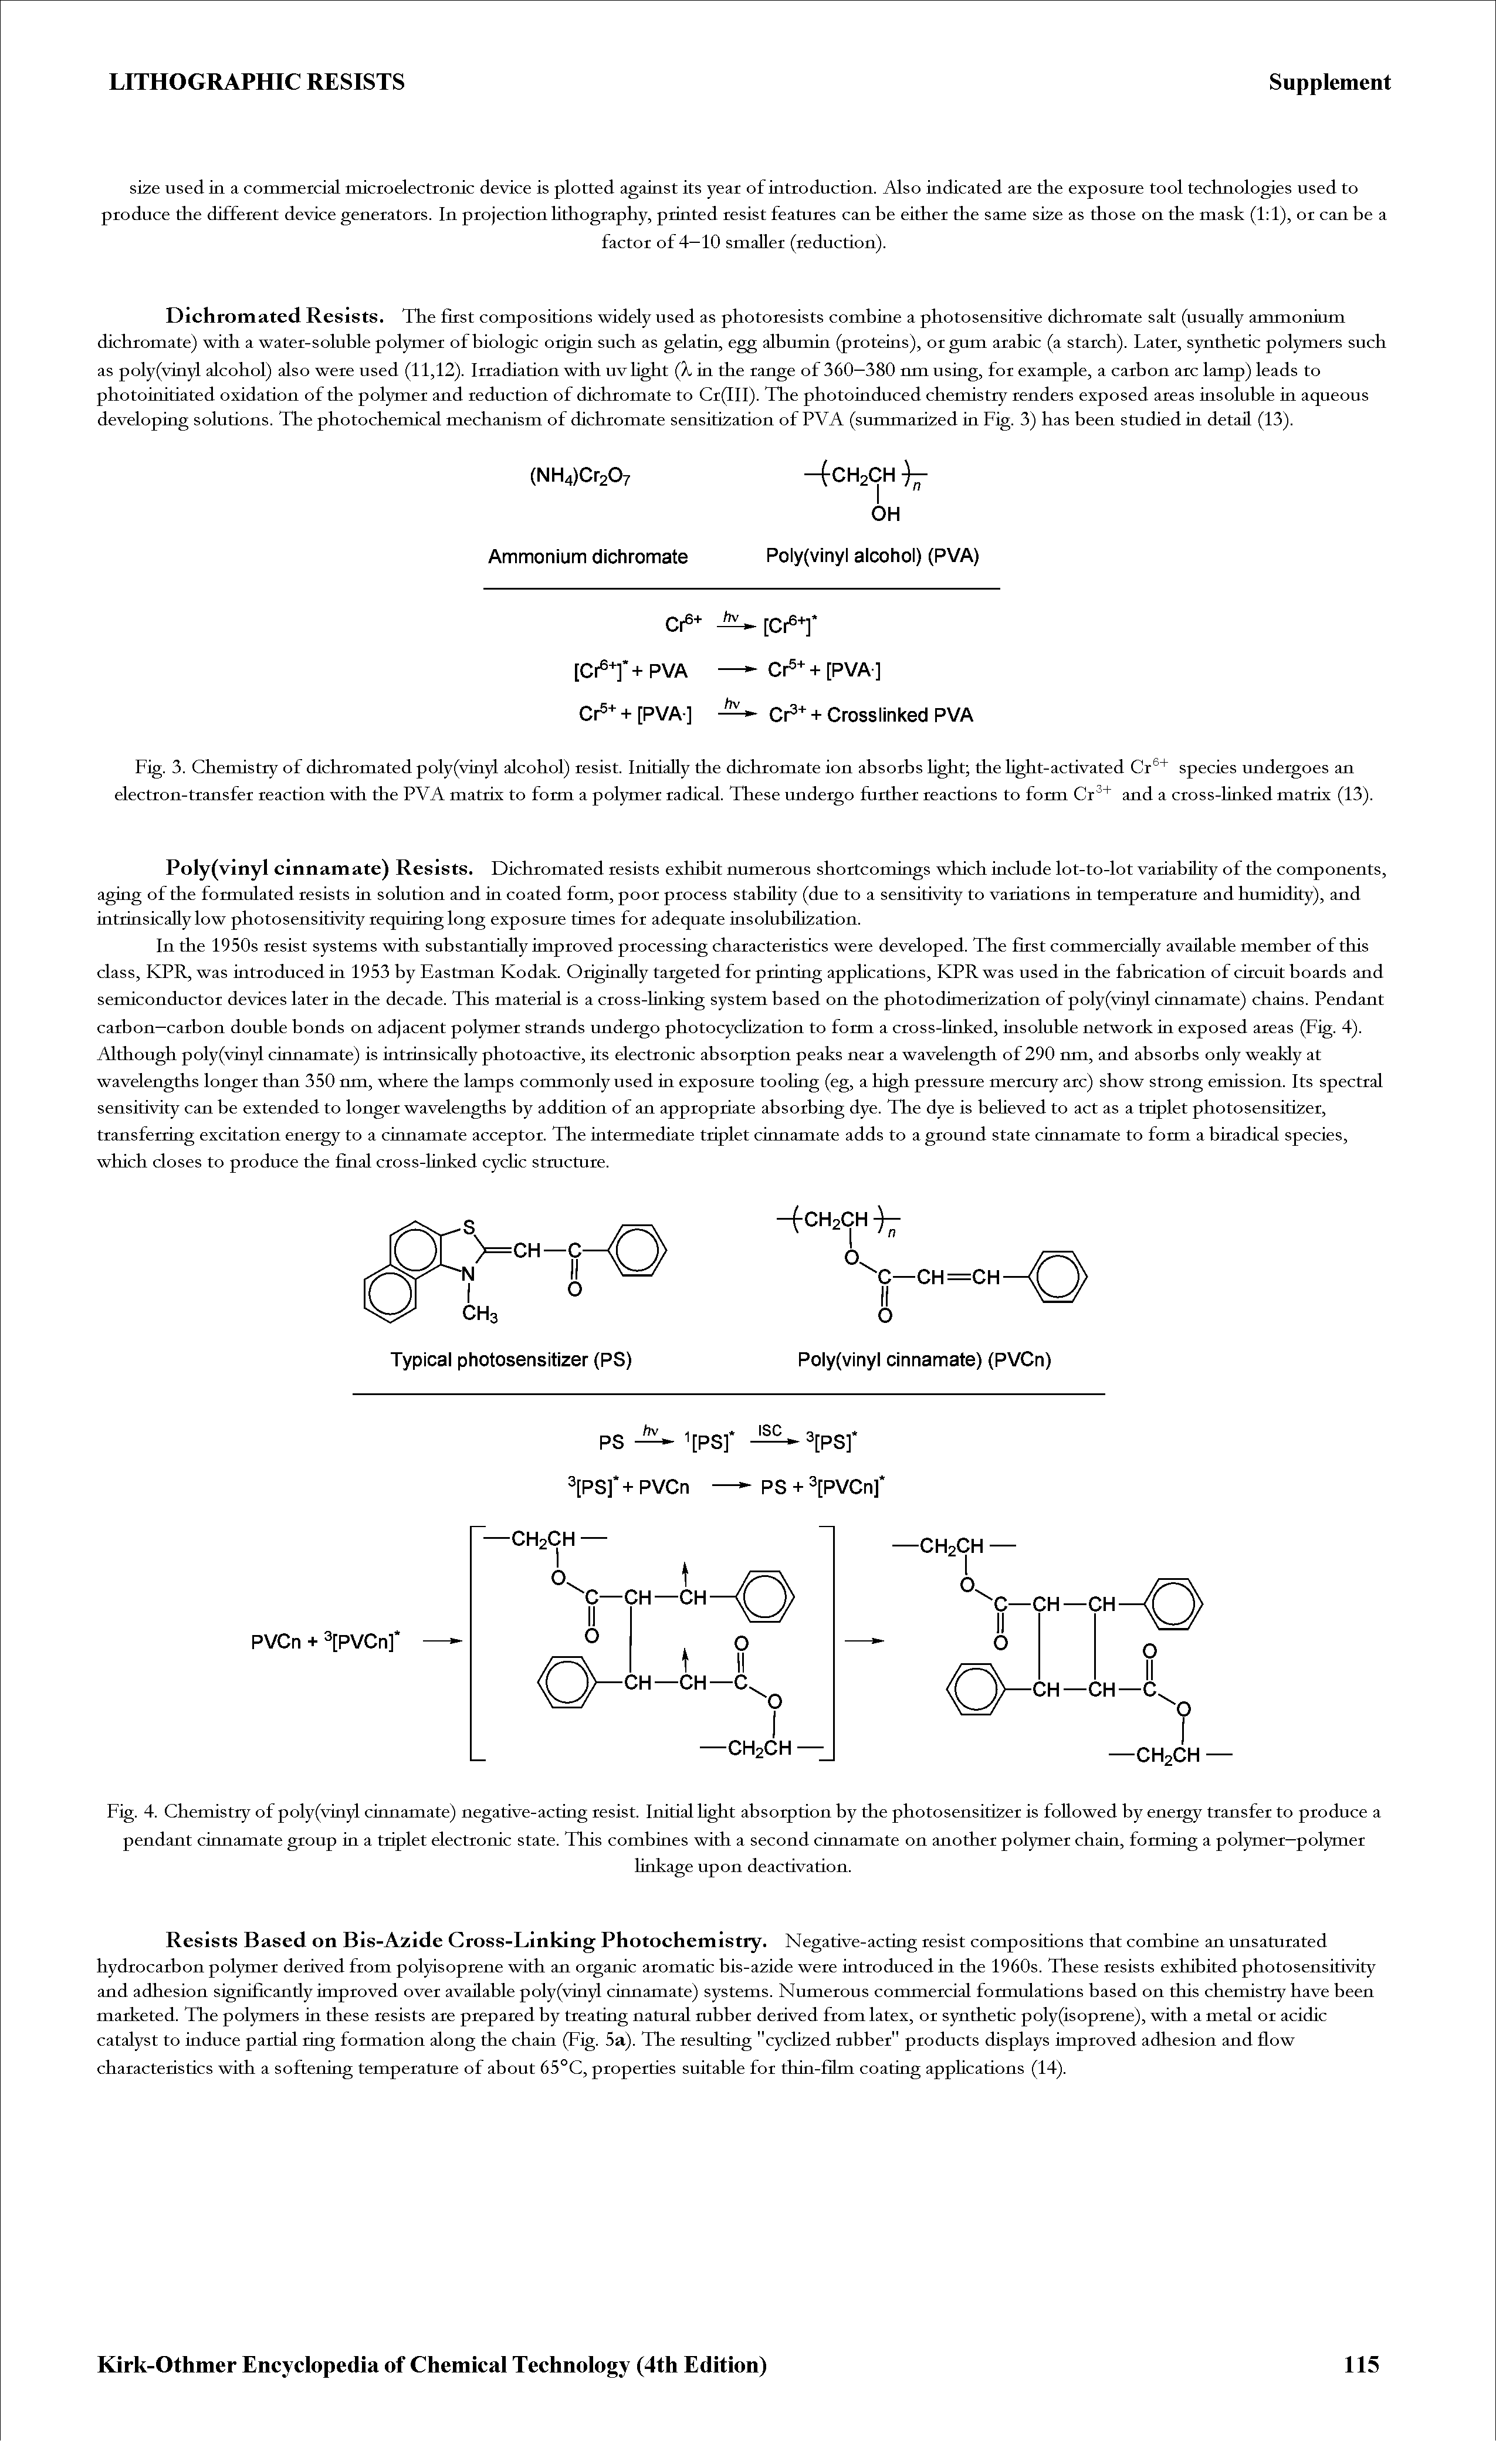 Fig. 4. Chemistry of poly(vinyl cinnamate) negative-acting resist. Initial light absorption by the photosensitizer is followed by energy transfer to produce a pendant cinnamate group in a triplet electronic state. This combines with a second cinnamate on another polymer chain, forming a polymer—polymer...